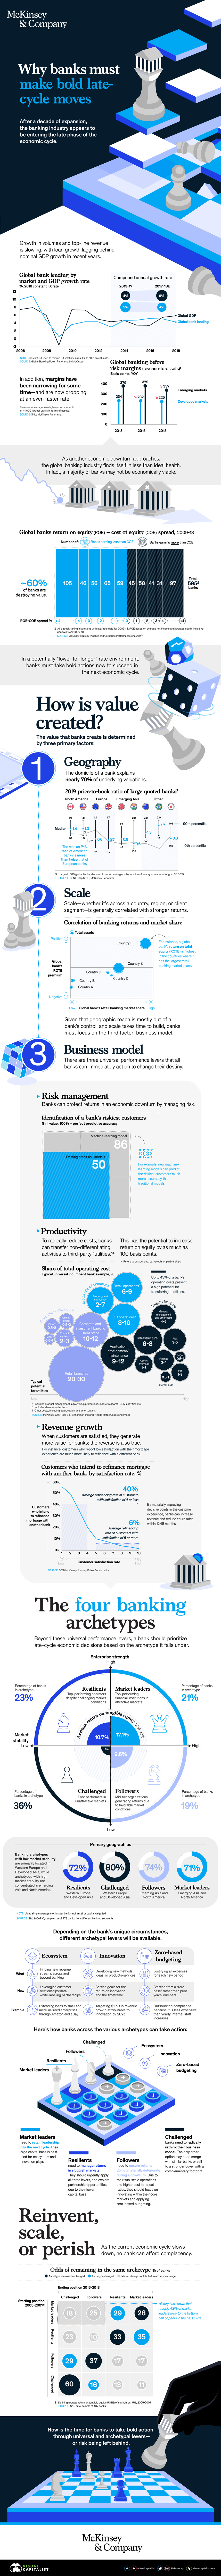 Late Cycle Banks McKinsey Infographic